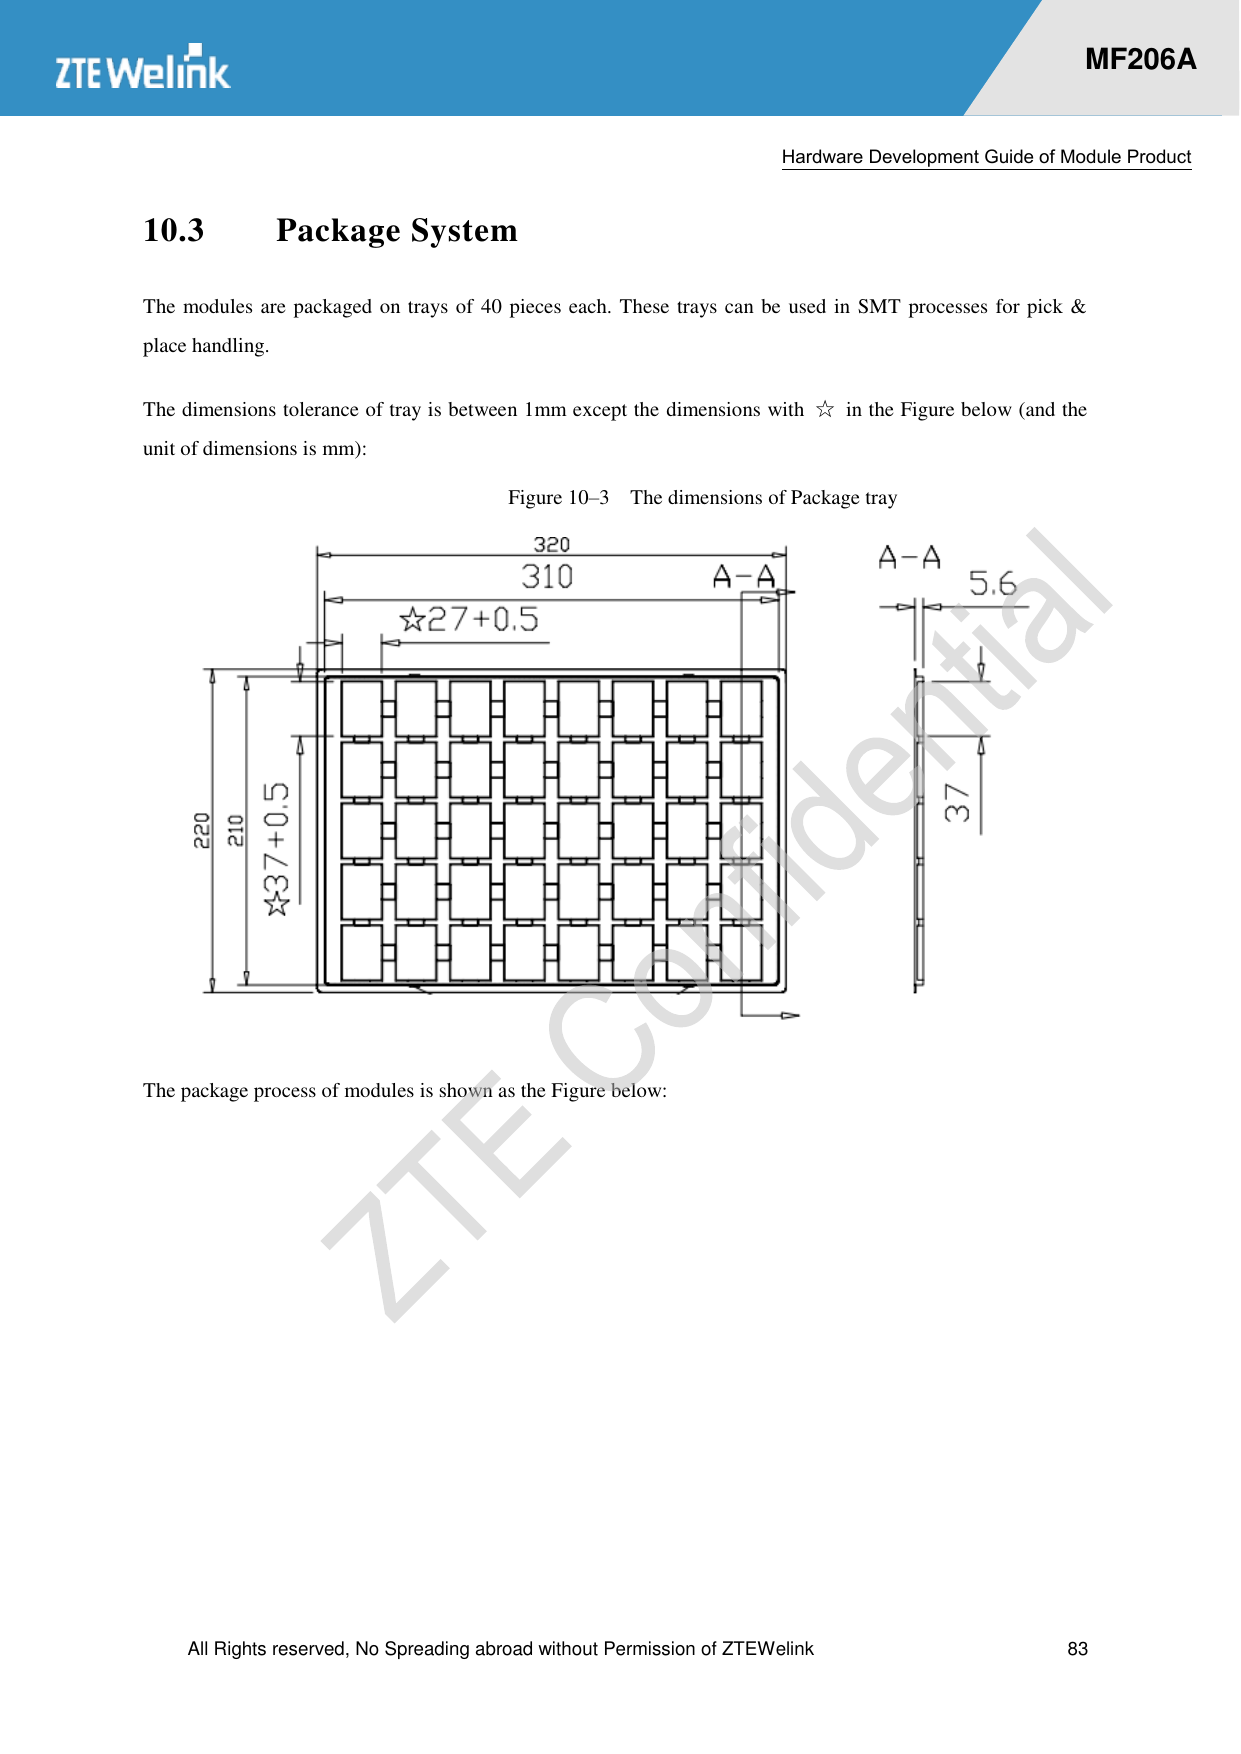  Hardware Development Guide of Module Product  All Rights reserved, No Spreading abroad without Permission of ZTEWelink  83    MF206A 10.3 Package System The modules are packaged on trays of 40 pieces each. These trays can be used in SMT processes for pick &amp; place handling.   The dimensions tolerance of tray is between 1mm except the dimensions with  ☆  in the Figure below (and the unit of dimensions is mm): Figure 10–3   The dimensions of Package tray  The package process of modules is shown as the Figure below: 